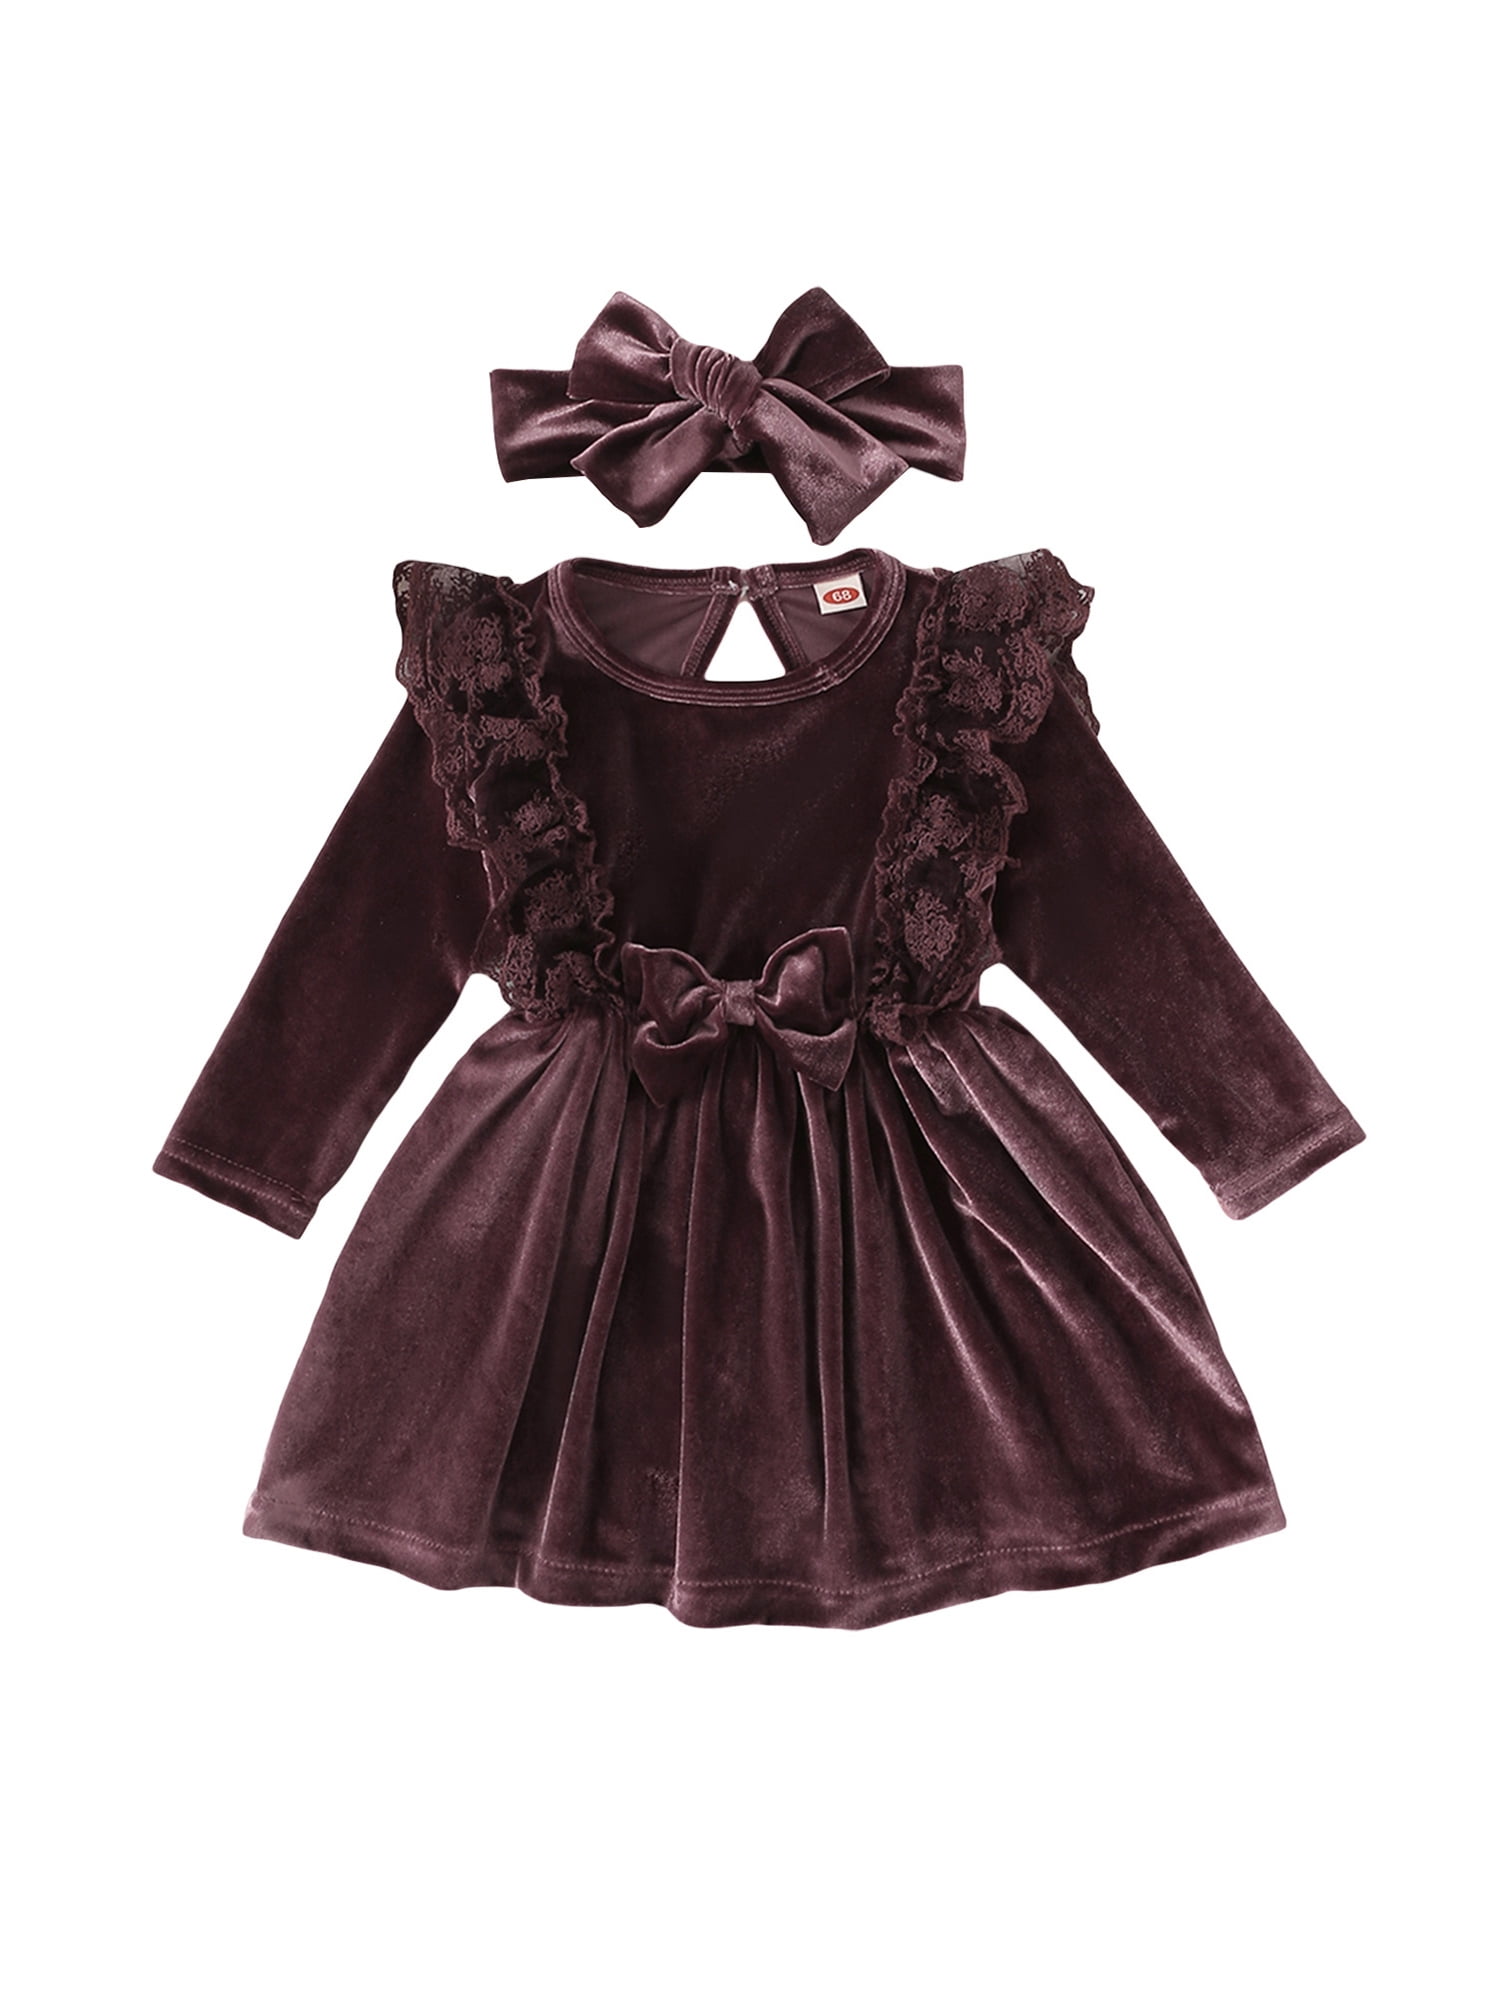 Blotona Toddler Baby Girl Velvet Dress Fall Winter Ruffle Pleated Dress  Cute Kids Lace Formal Party Princess Dreses with Headband 